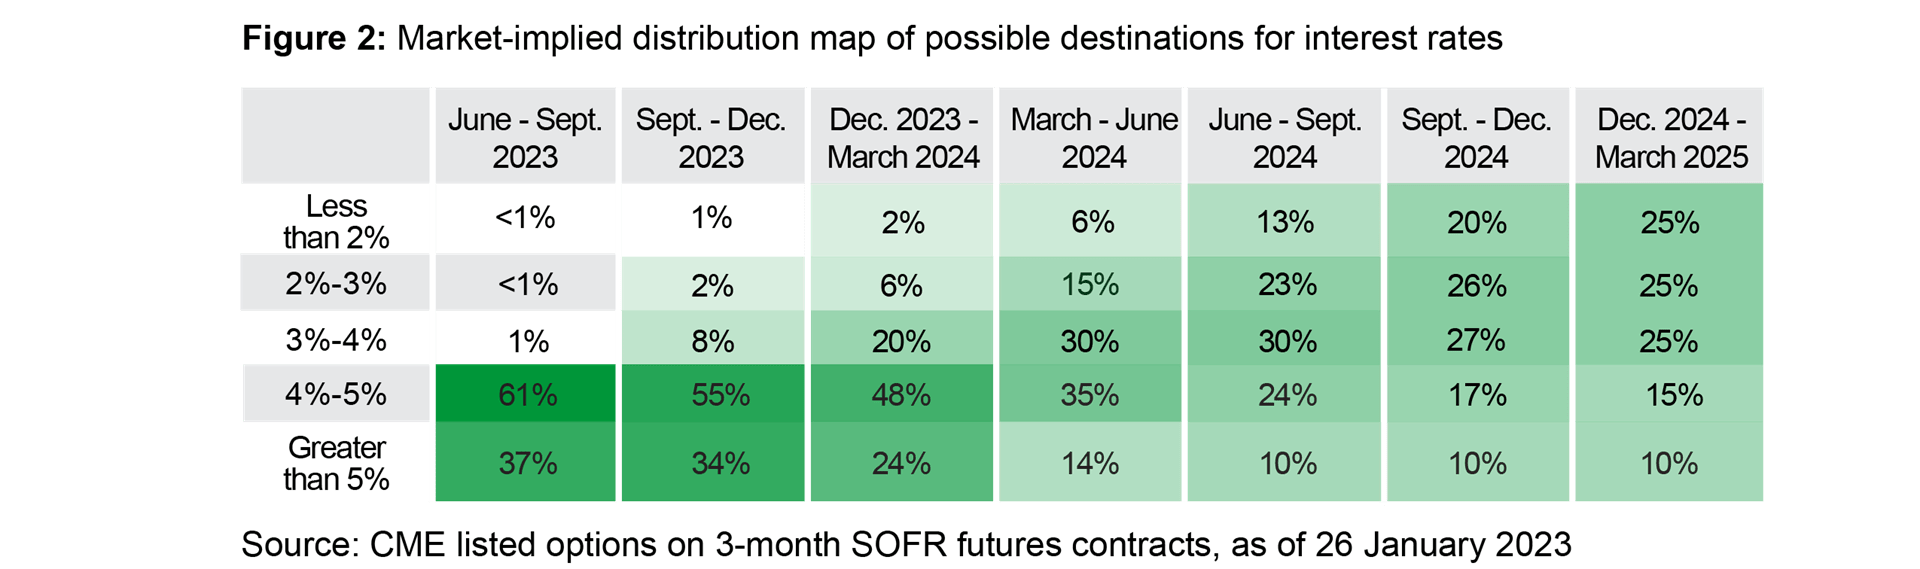 Figure 2 is a table that uses CME-listed options on three-month Secured Overnight Financing Rate (SOFR) futures contracts to create a market-implied distribution map of possible destinations for interest rates. It shows the market is displaying a fair amount of confidence that the Fed won’t spend a significant amount of time holding rates above 5%, if at all, and that range of likely outcomes drifts wider into 2024 and beyond.